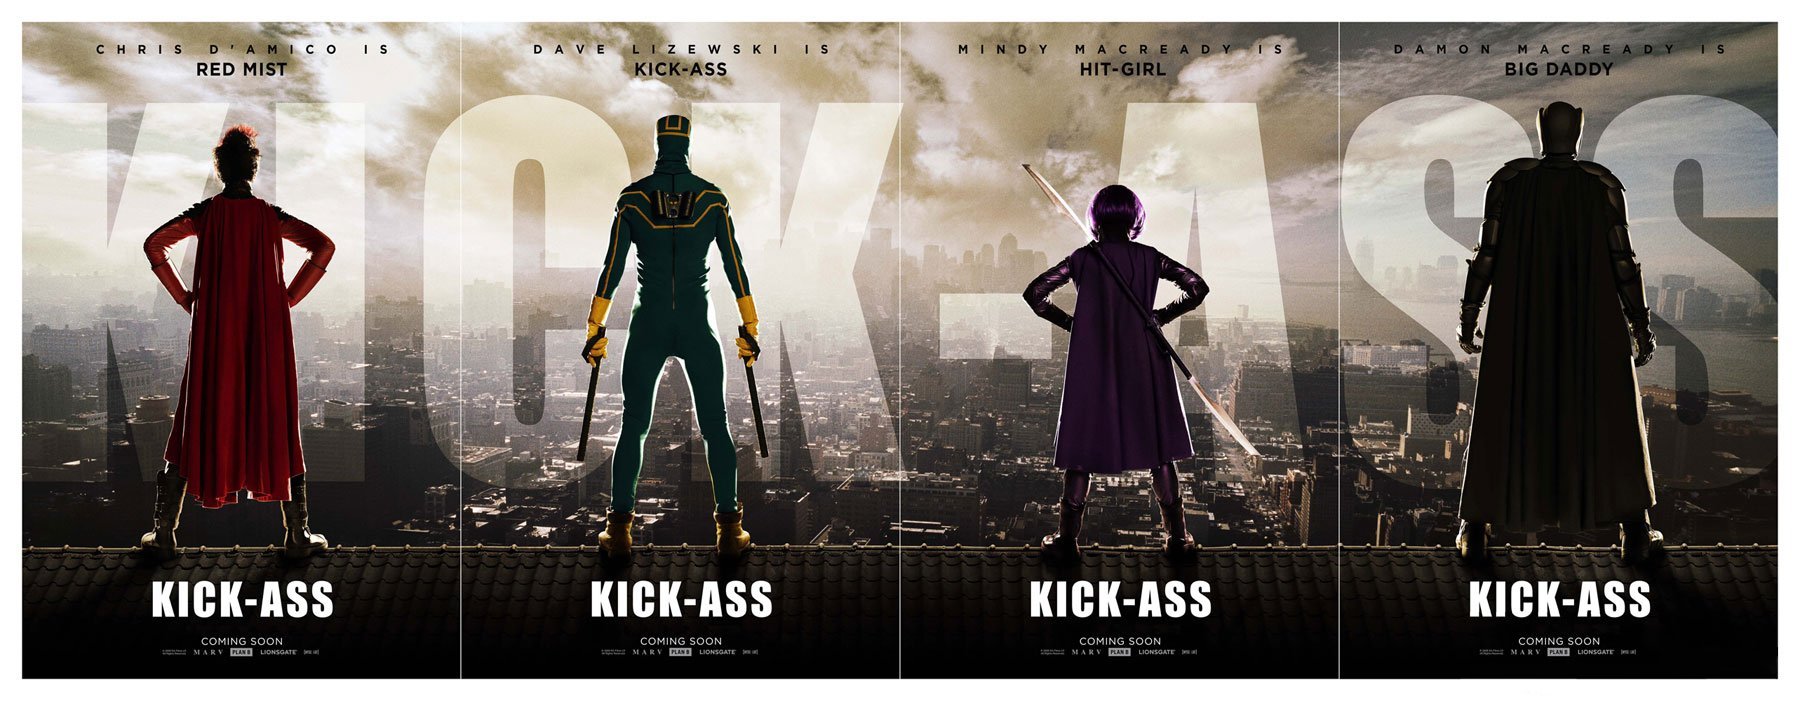 KickAss Images Banner HD Wallpaper And Background Photos 29528594